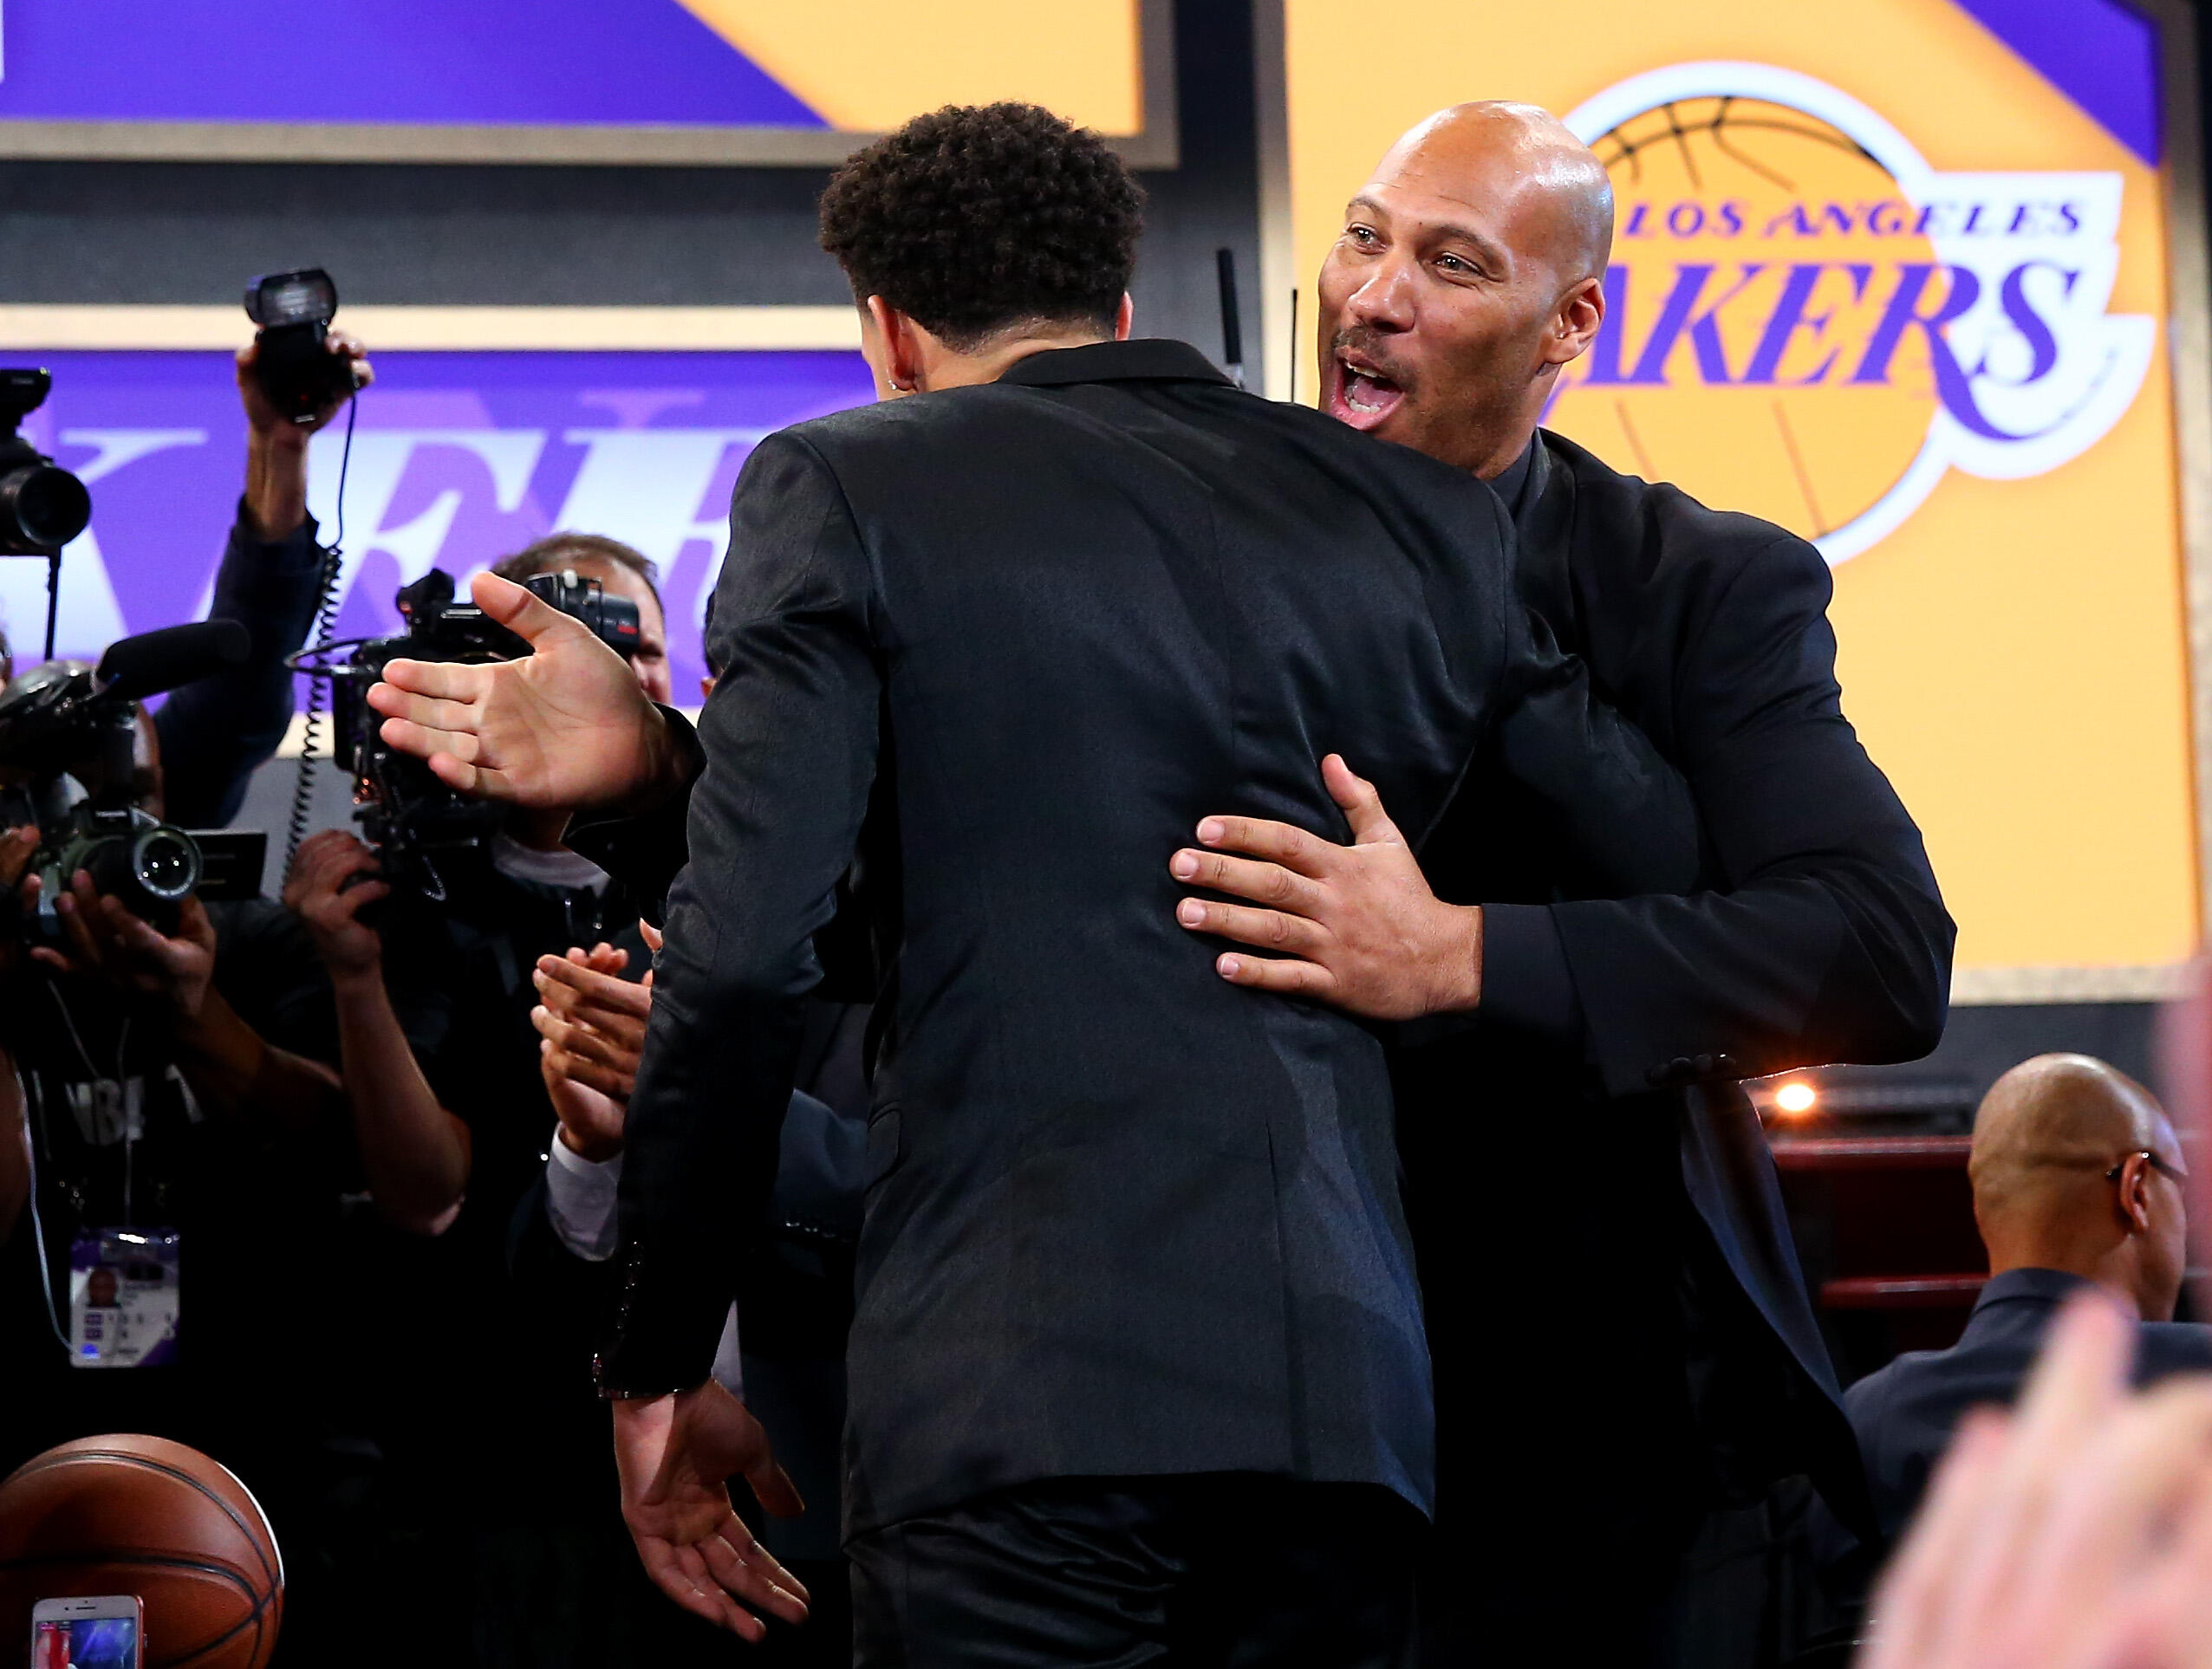 NEW YORK, NY - JUNE 22: Lonzo Ball reacts with his father LaVar Ball after being drafted second overall by the Los Angeles Lakers during the first round of the 2017 NBA Draft at Barclays Center on June 22, 2017 in New York City. NOTE TO USER: User express